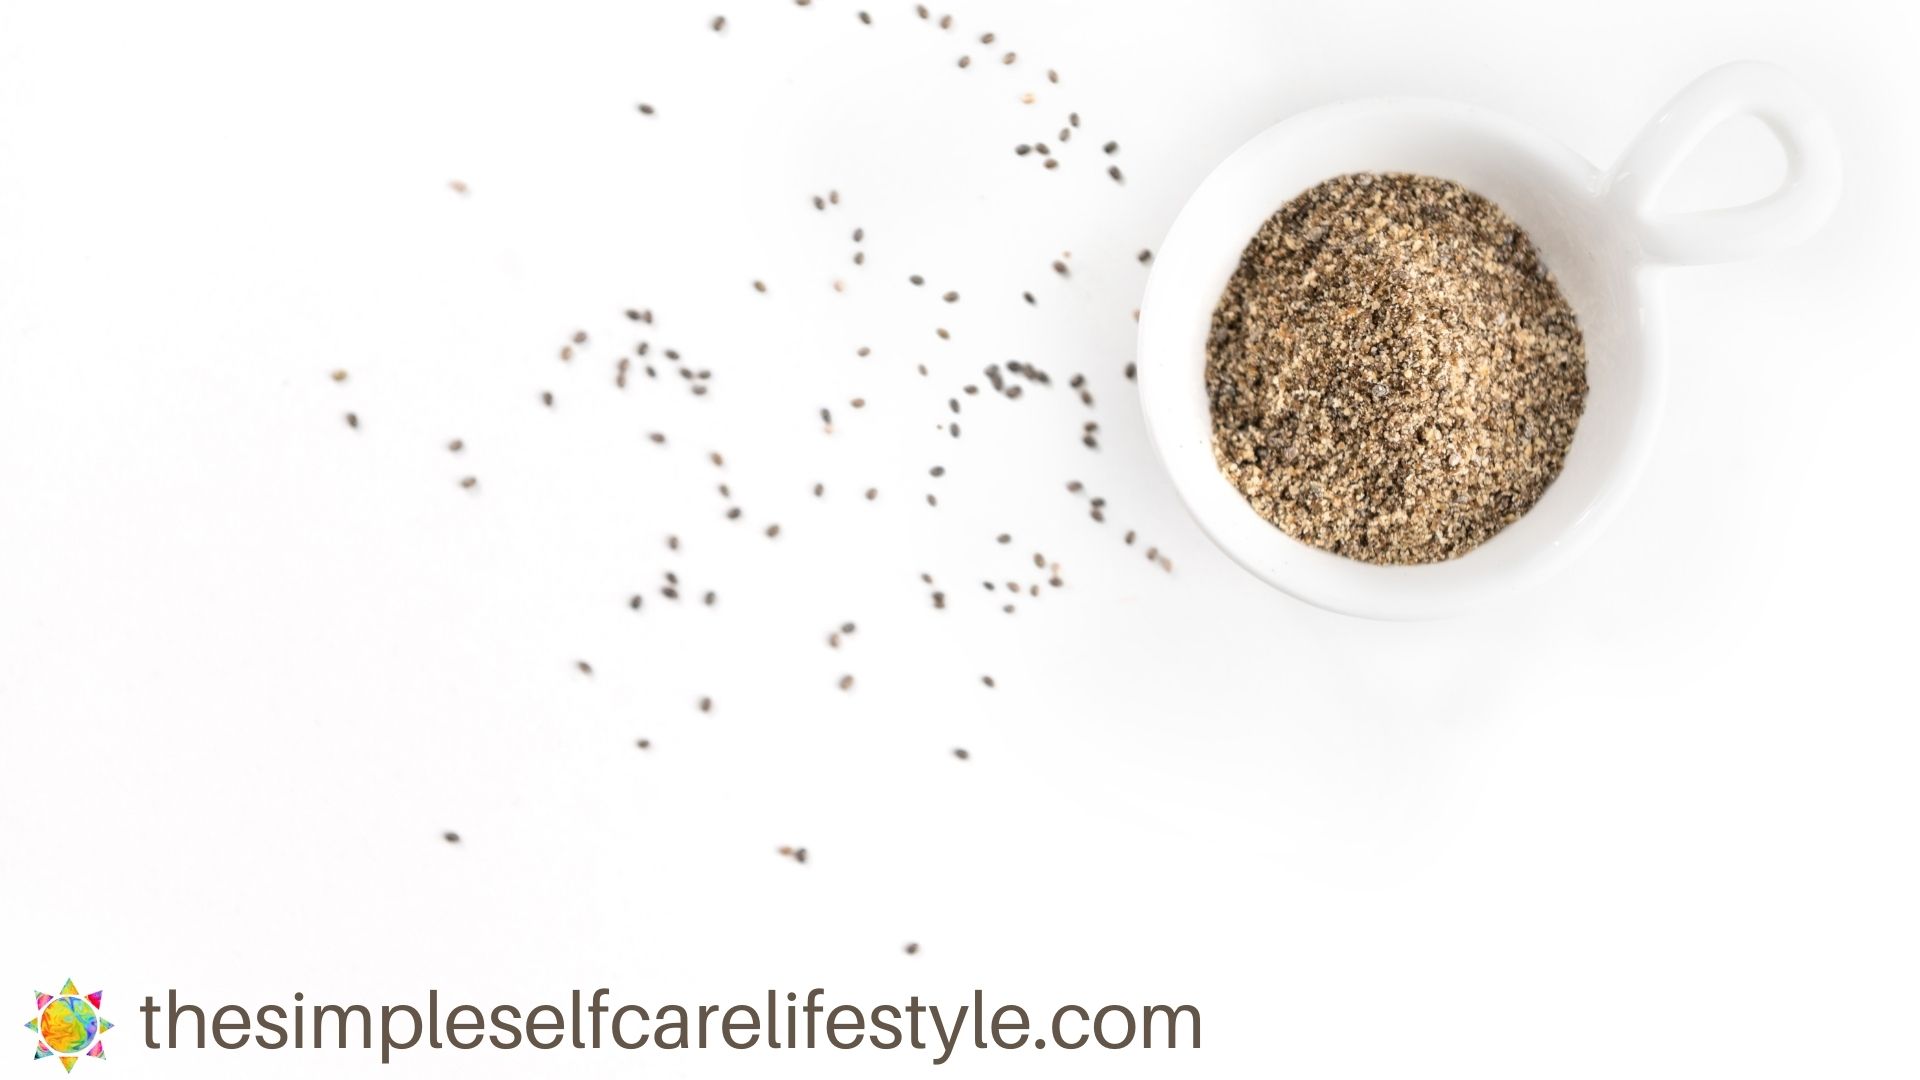 flax seeds good for so many things. Be sure to grind them to release their nutrients